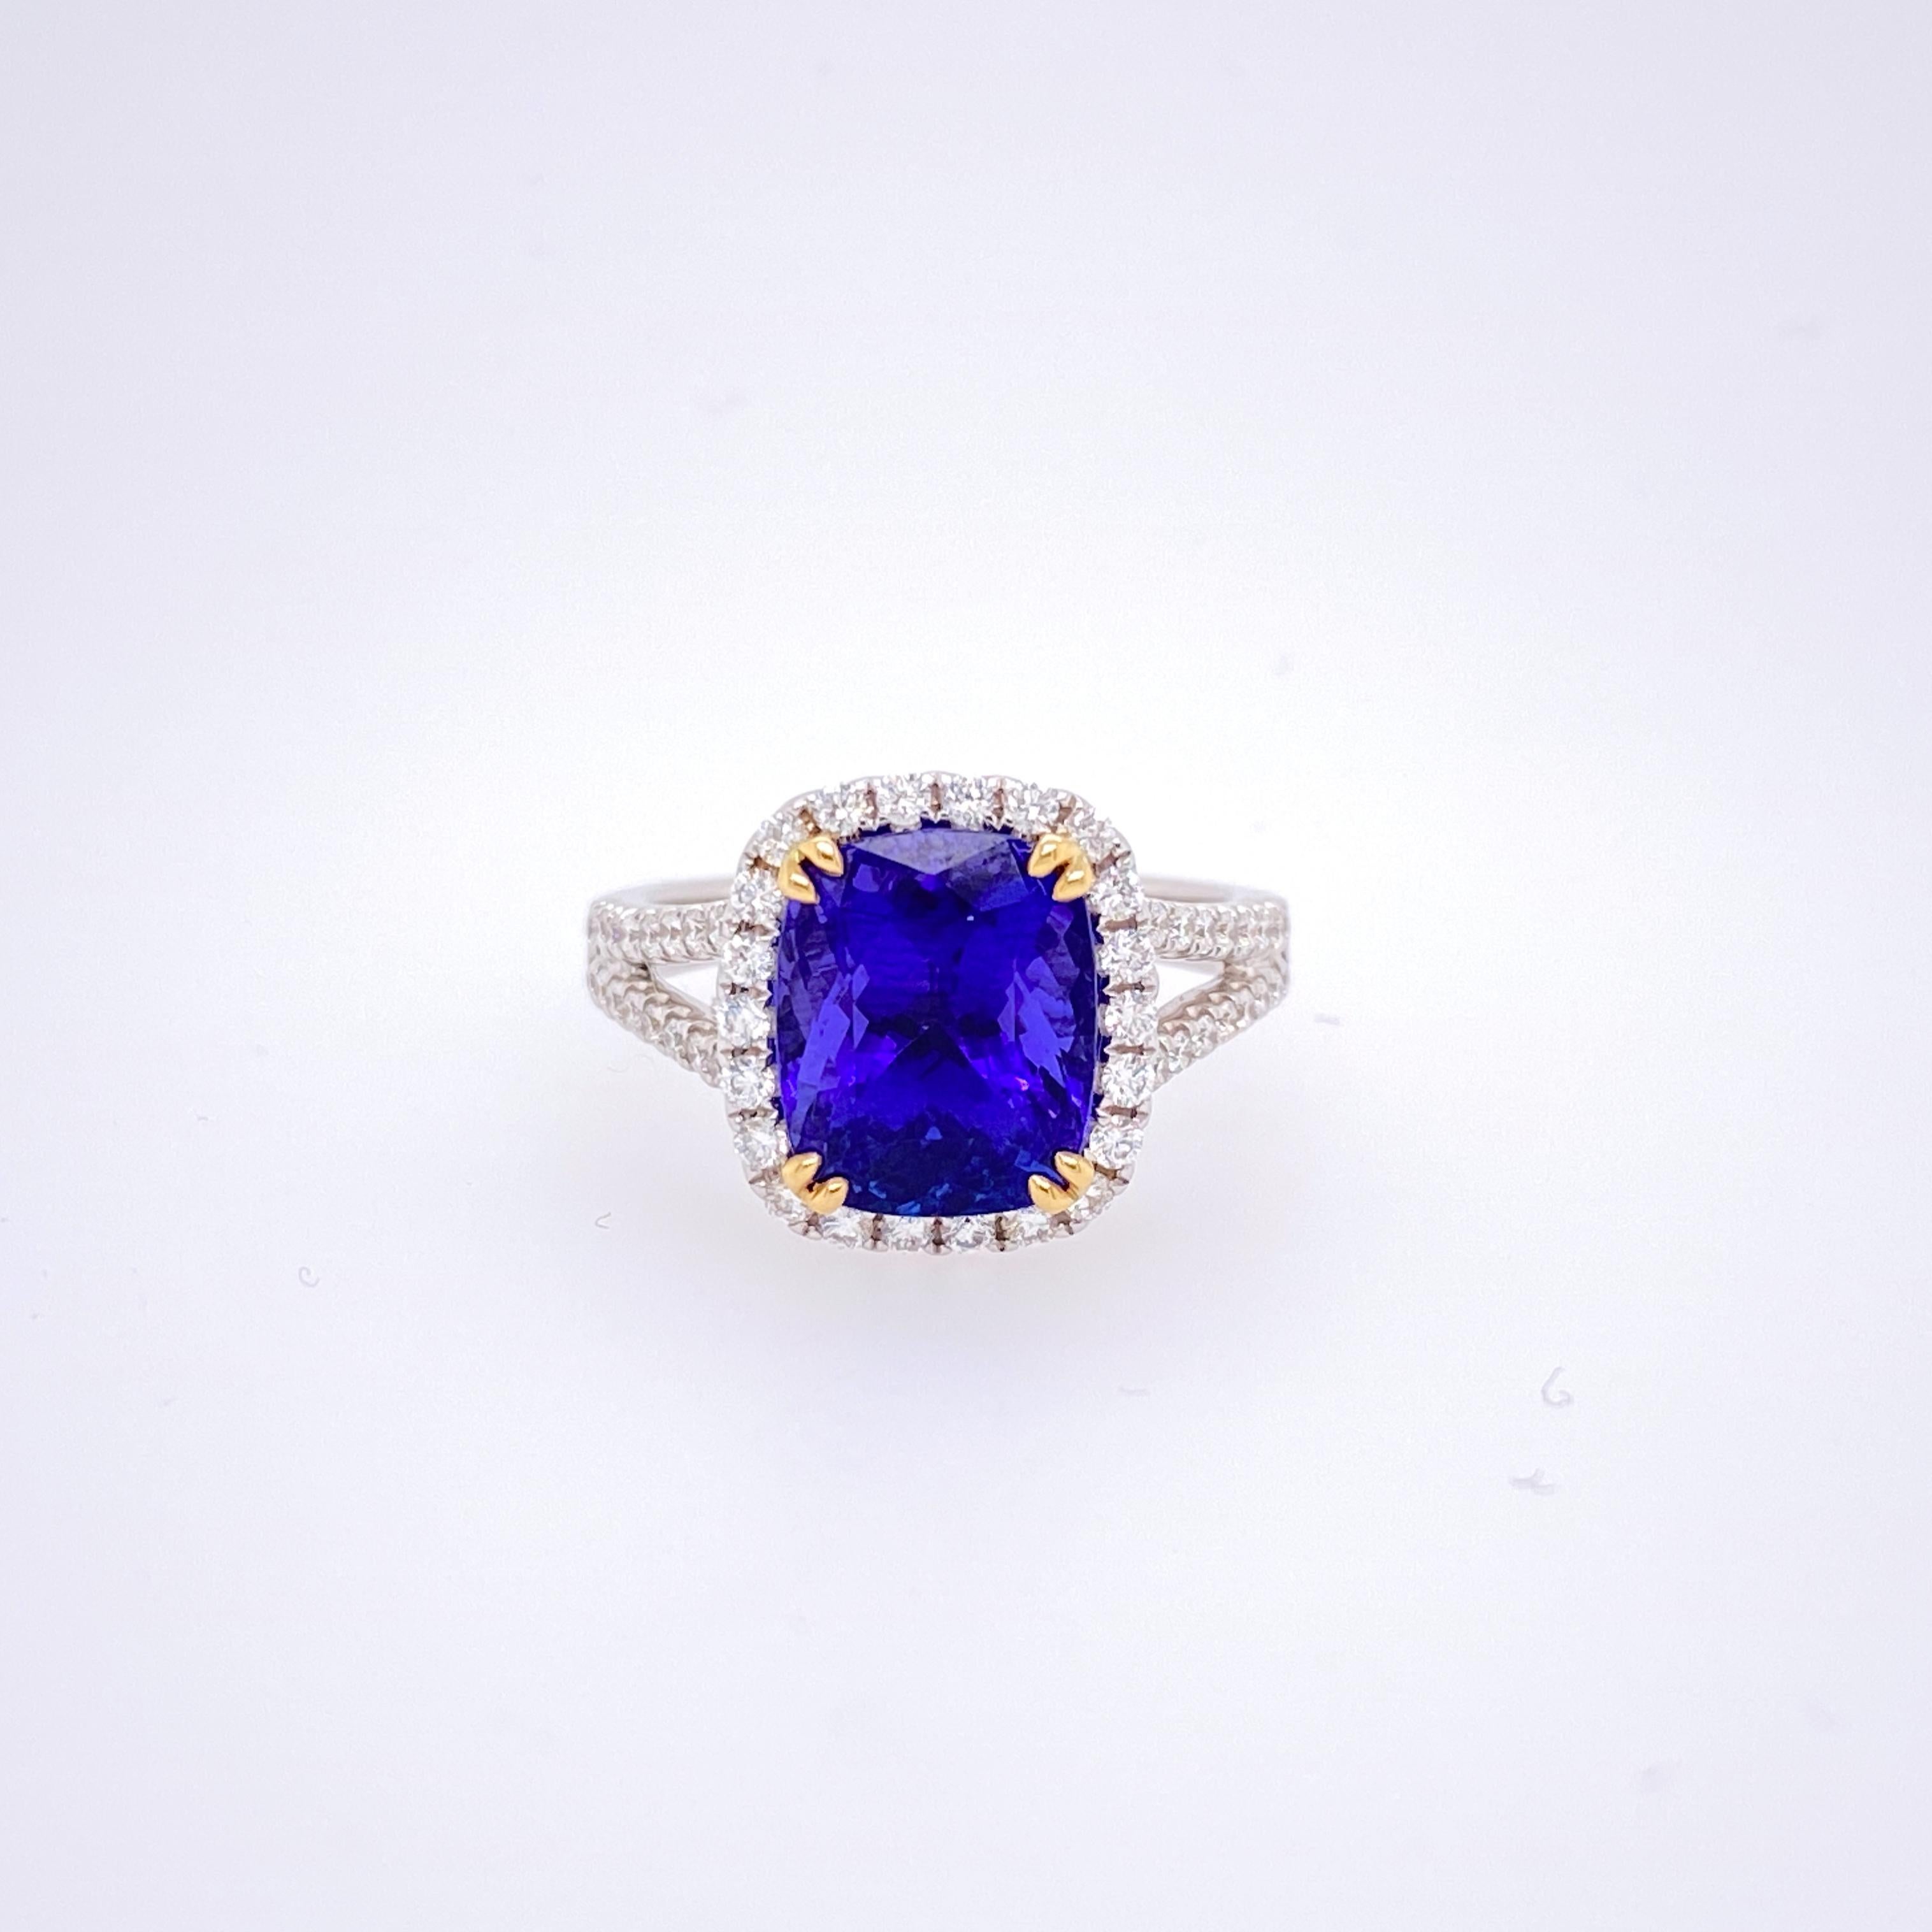 This beautiful cocktail ring features a stunning 4.57 Carat Cushion Tanzanite with a Diamond Halo, on a Double Diamond Shank. This Ring is set in 18k White Gold, with 18k Yellow Gold prongs on the center stone. Total Diamond Weight = 0.59 Carats.